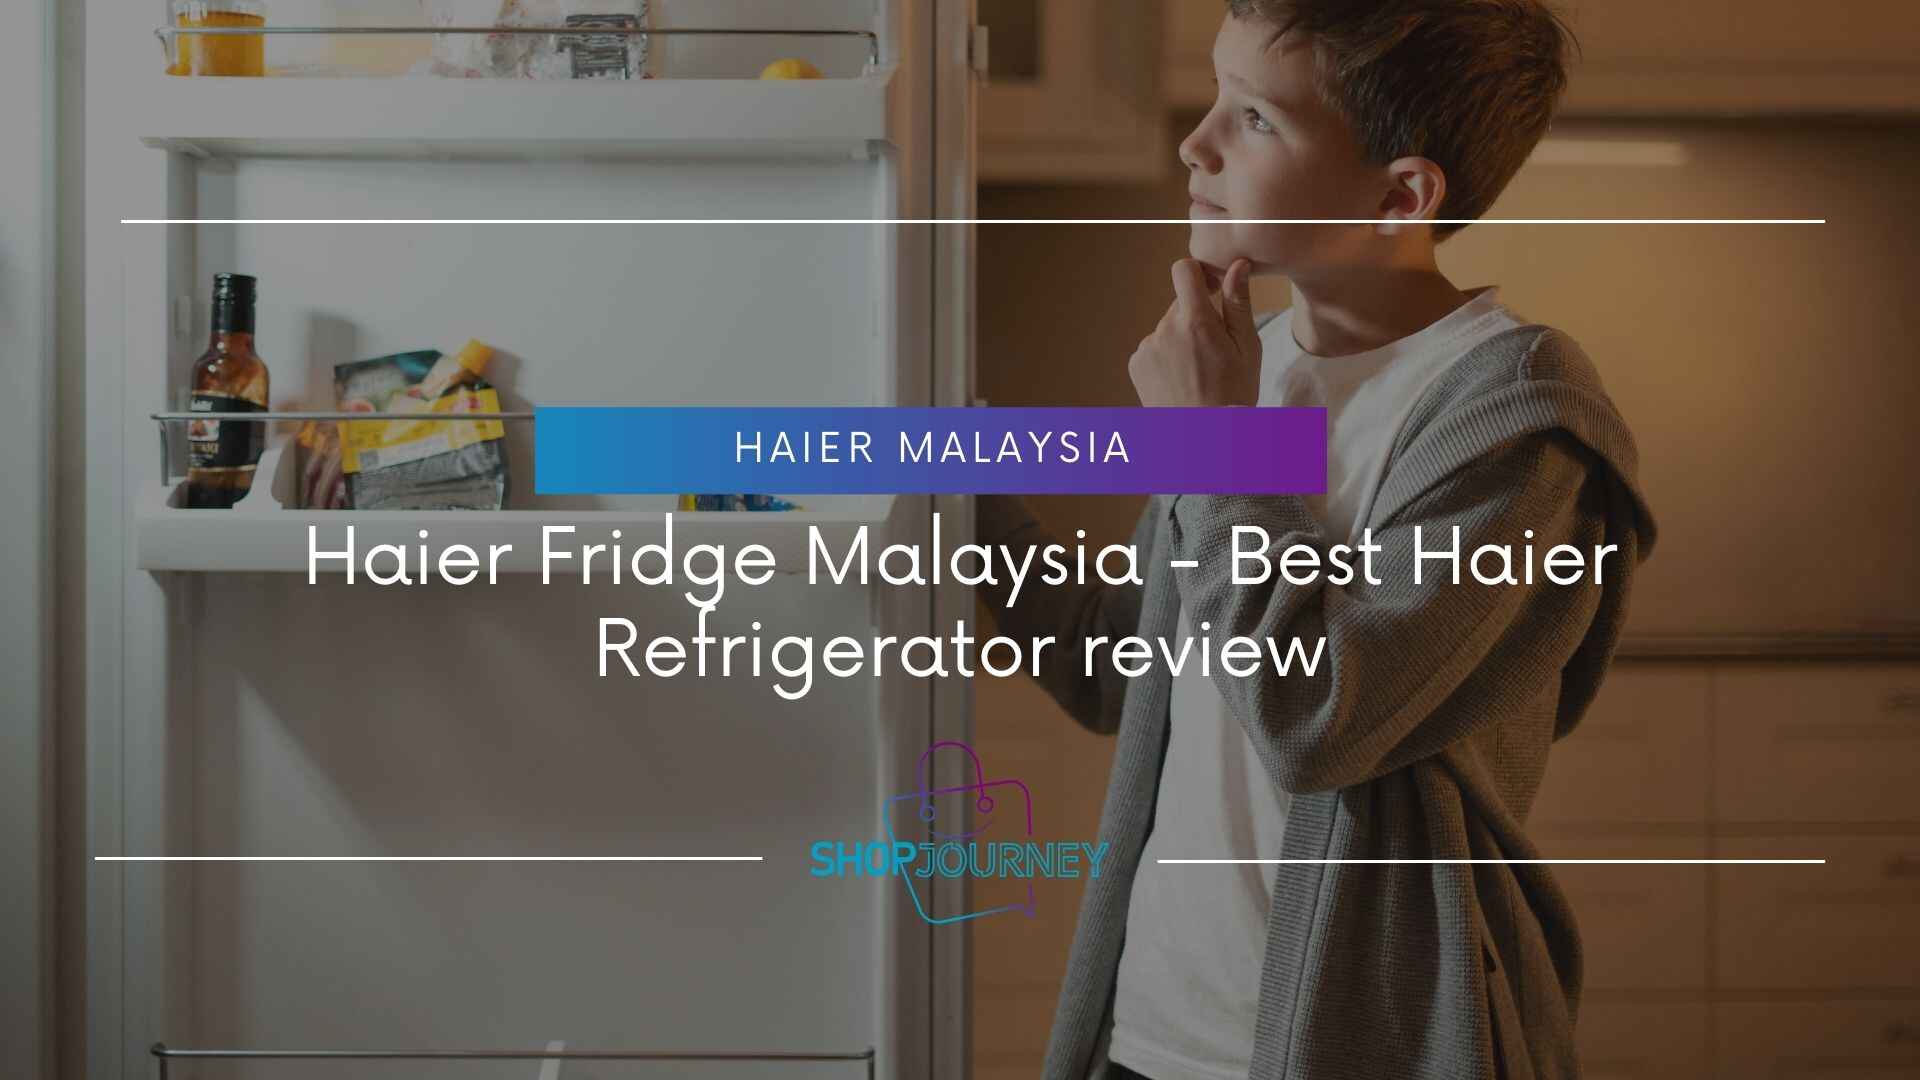 Haier Malaysia offers the best Haier refrigerator options, providing a comprehensive review of their top models.